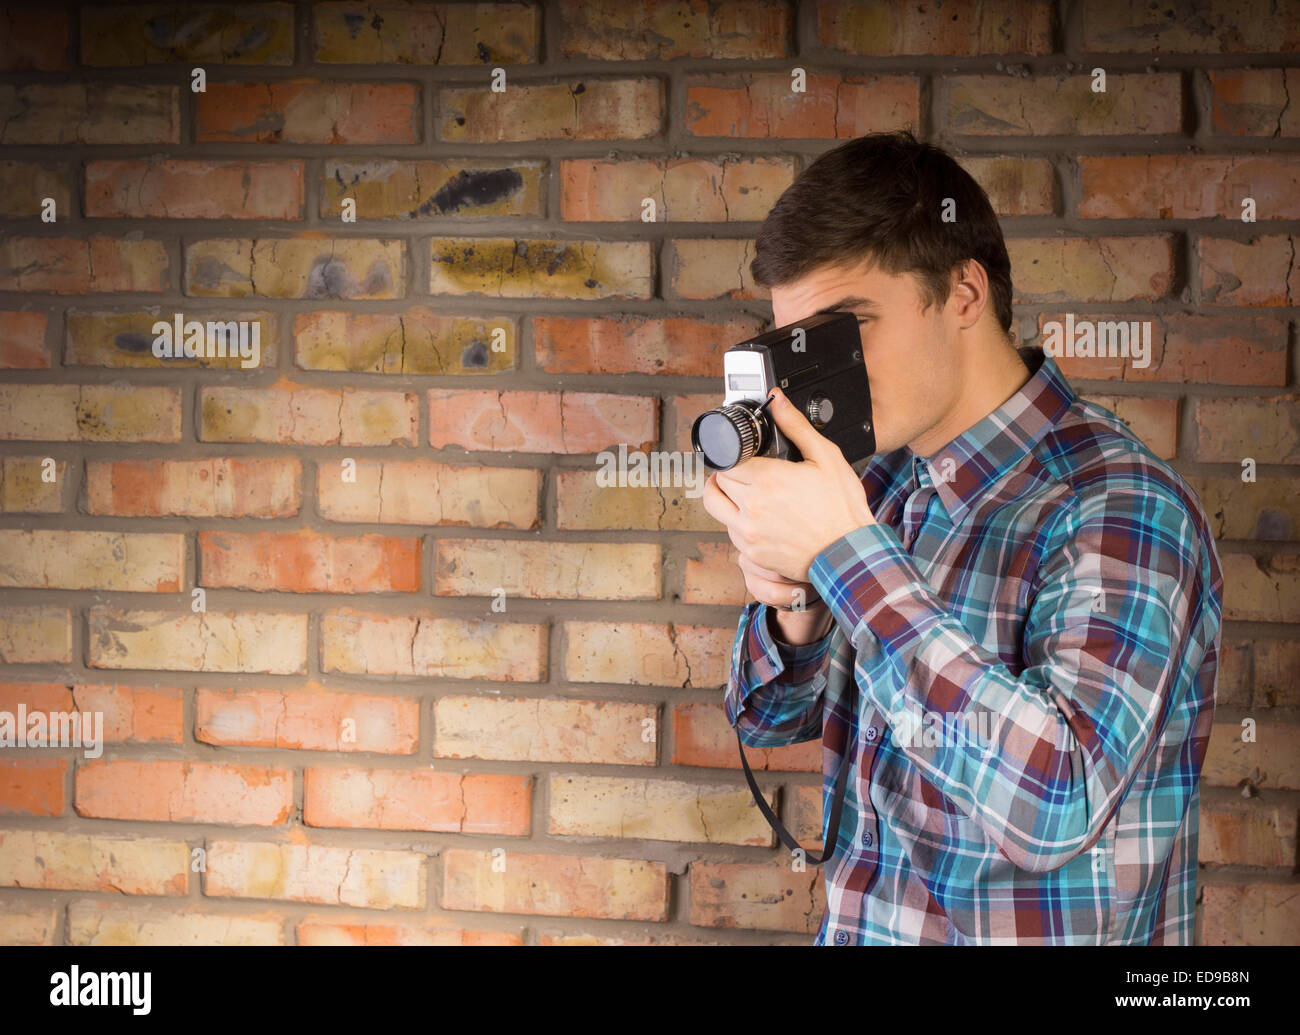 Close up Young Man in Checkered Long Sleeve Shirt Recording Something Using Portable Device on a Brick Wall Background. Stock Photo